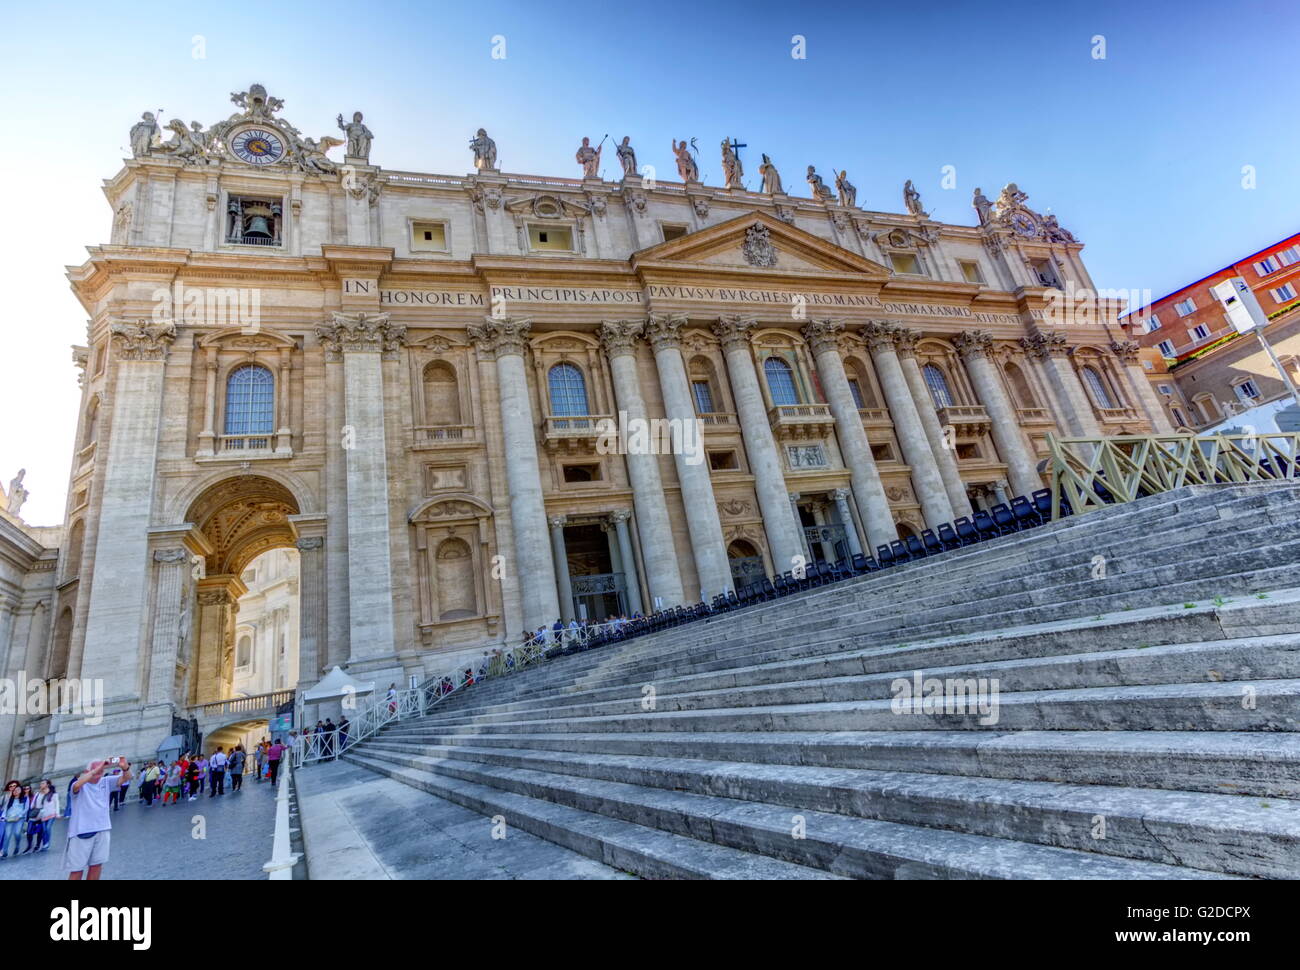 Saint-Peter's basilica facade and stairs by day, Roma, Italy Stock Photo